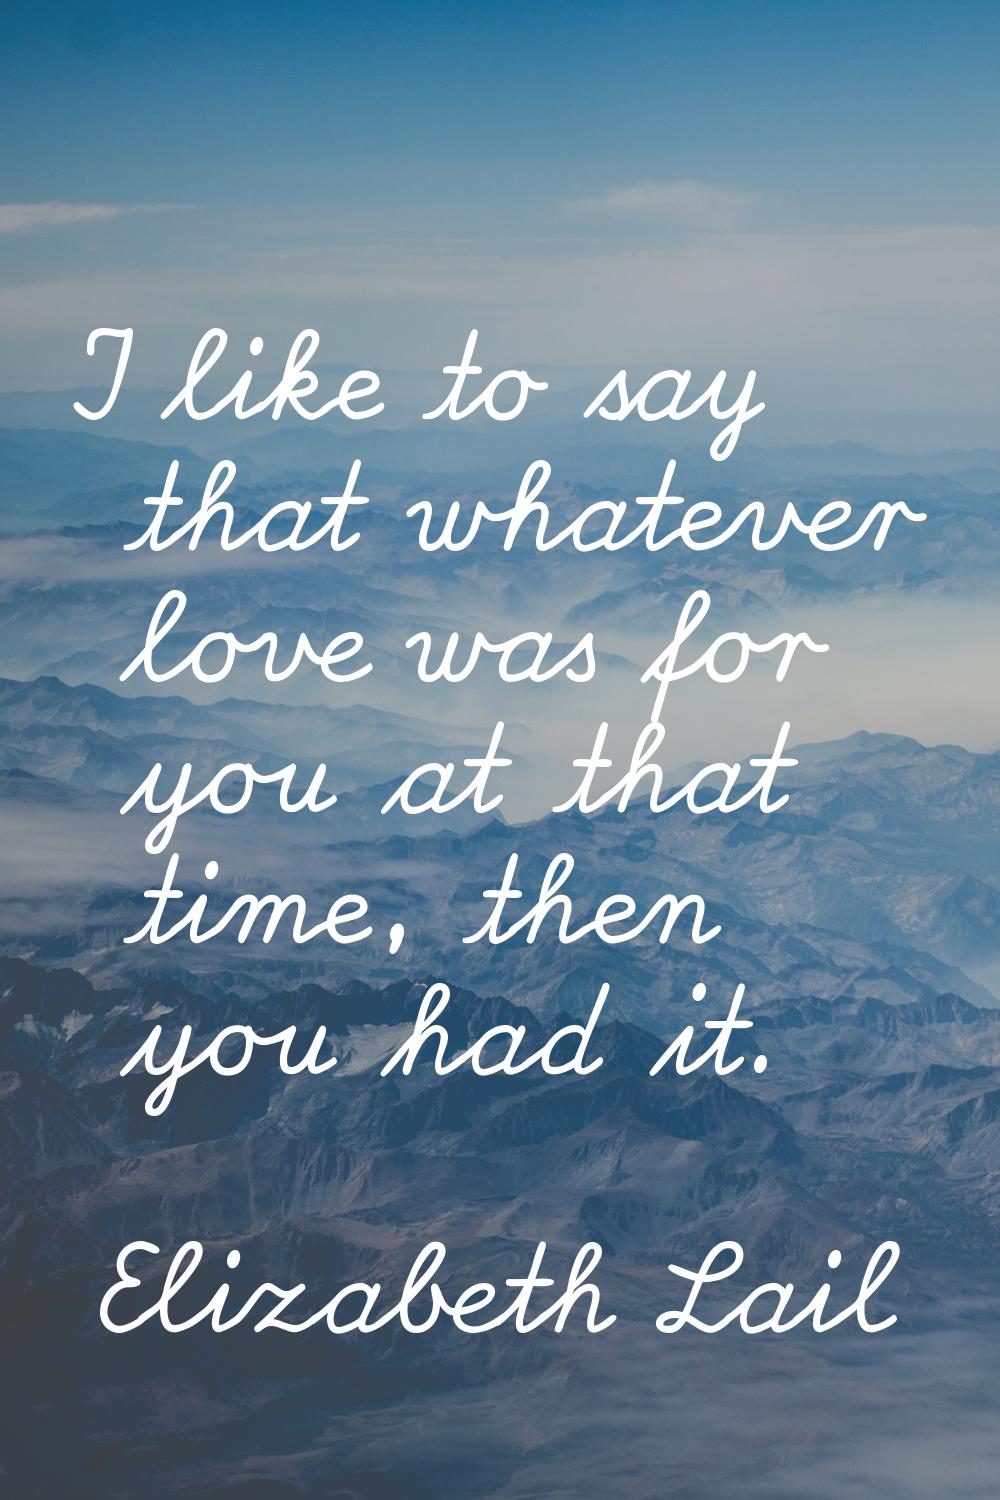 I like to say that whatever love was for you at that time, then you had it.